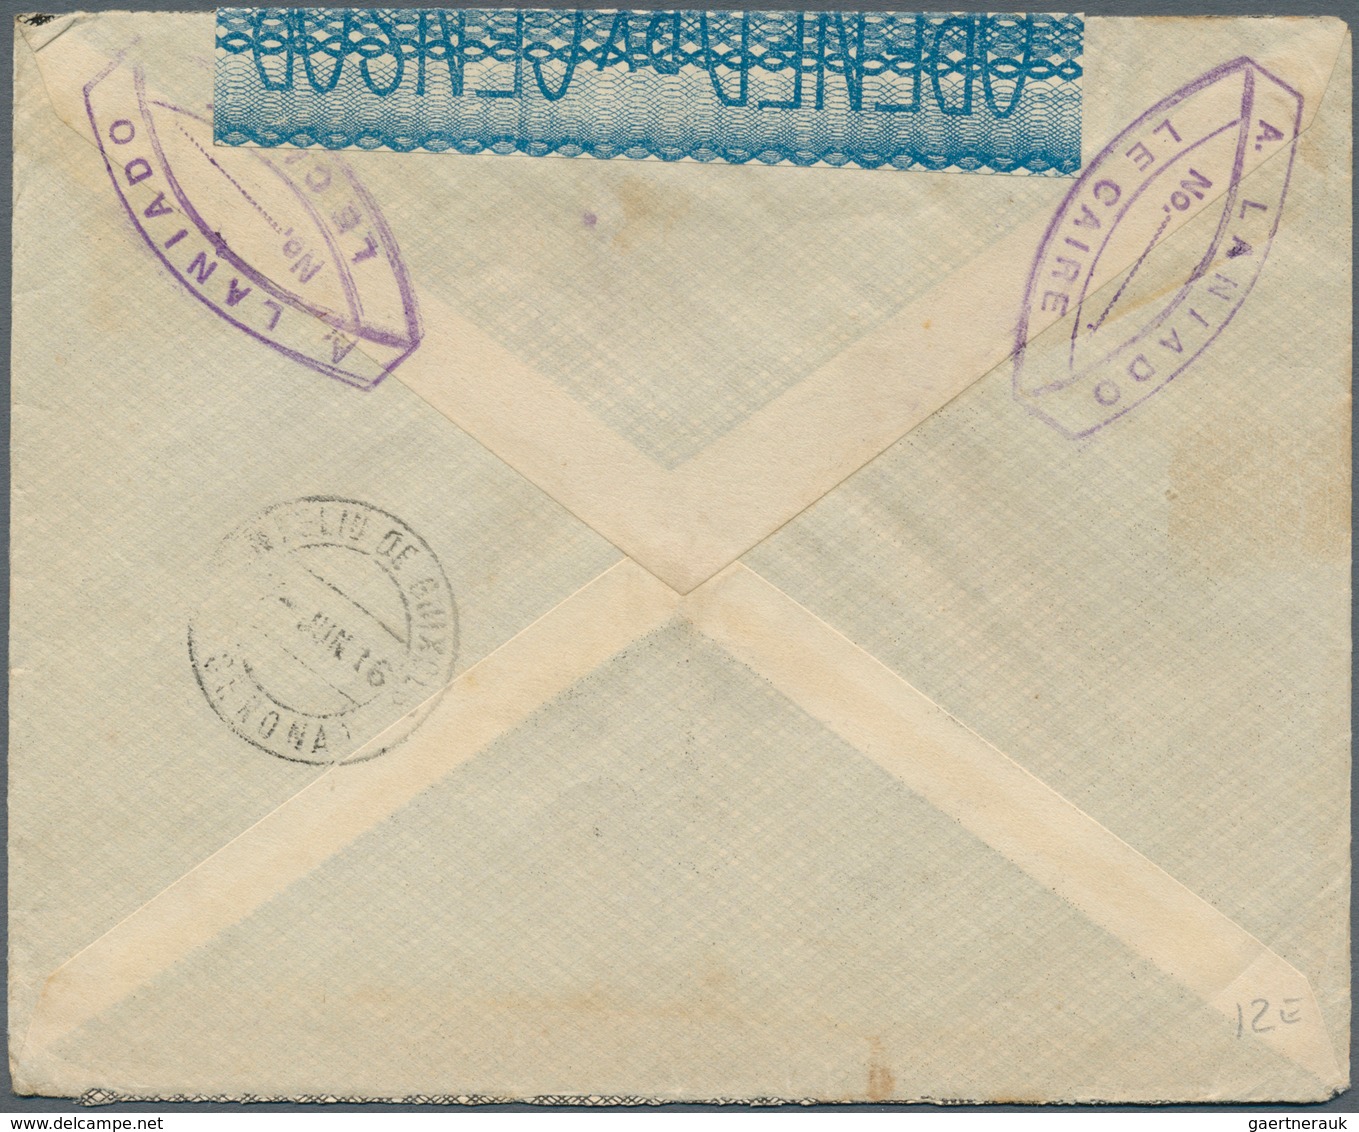 Ägypten - Stempel: 1915/16, Lot of 7 comercially used R-Letters to Spain with censor-stripes and cen